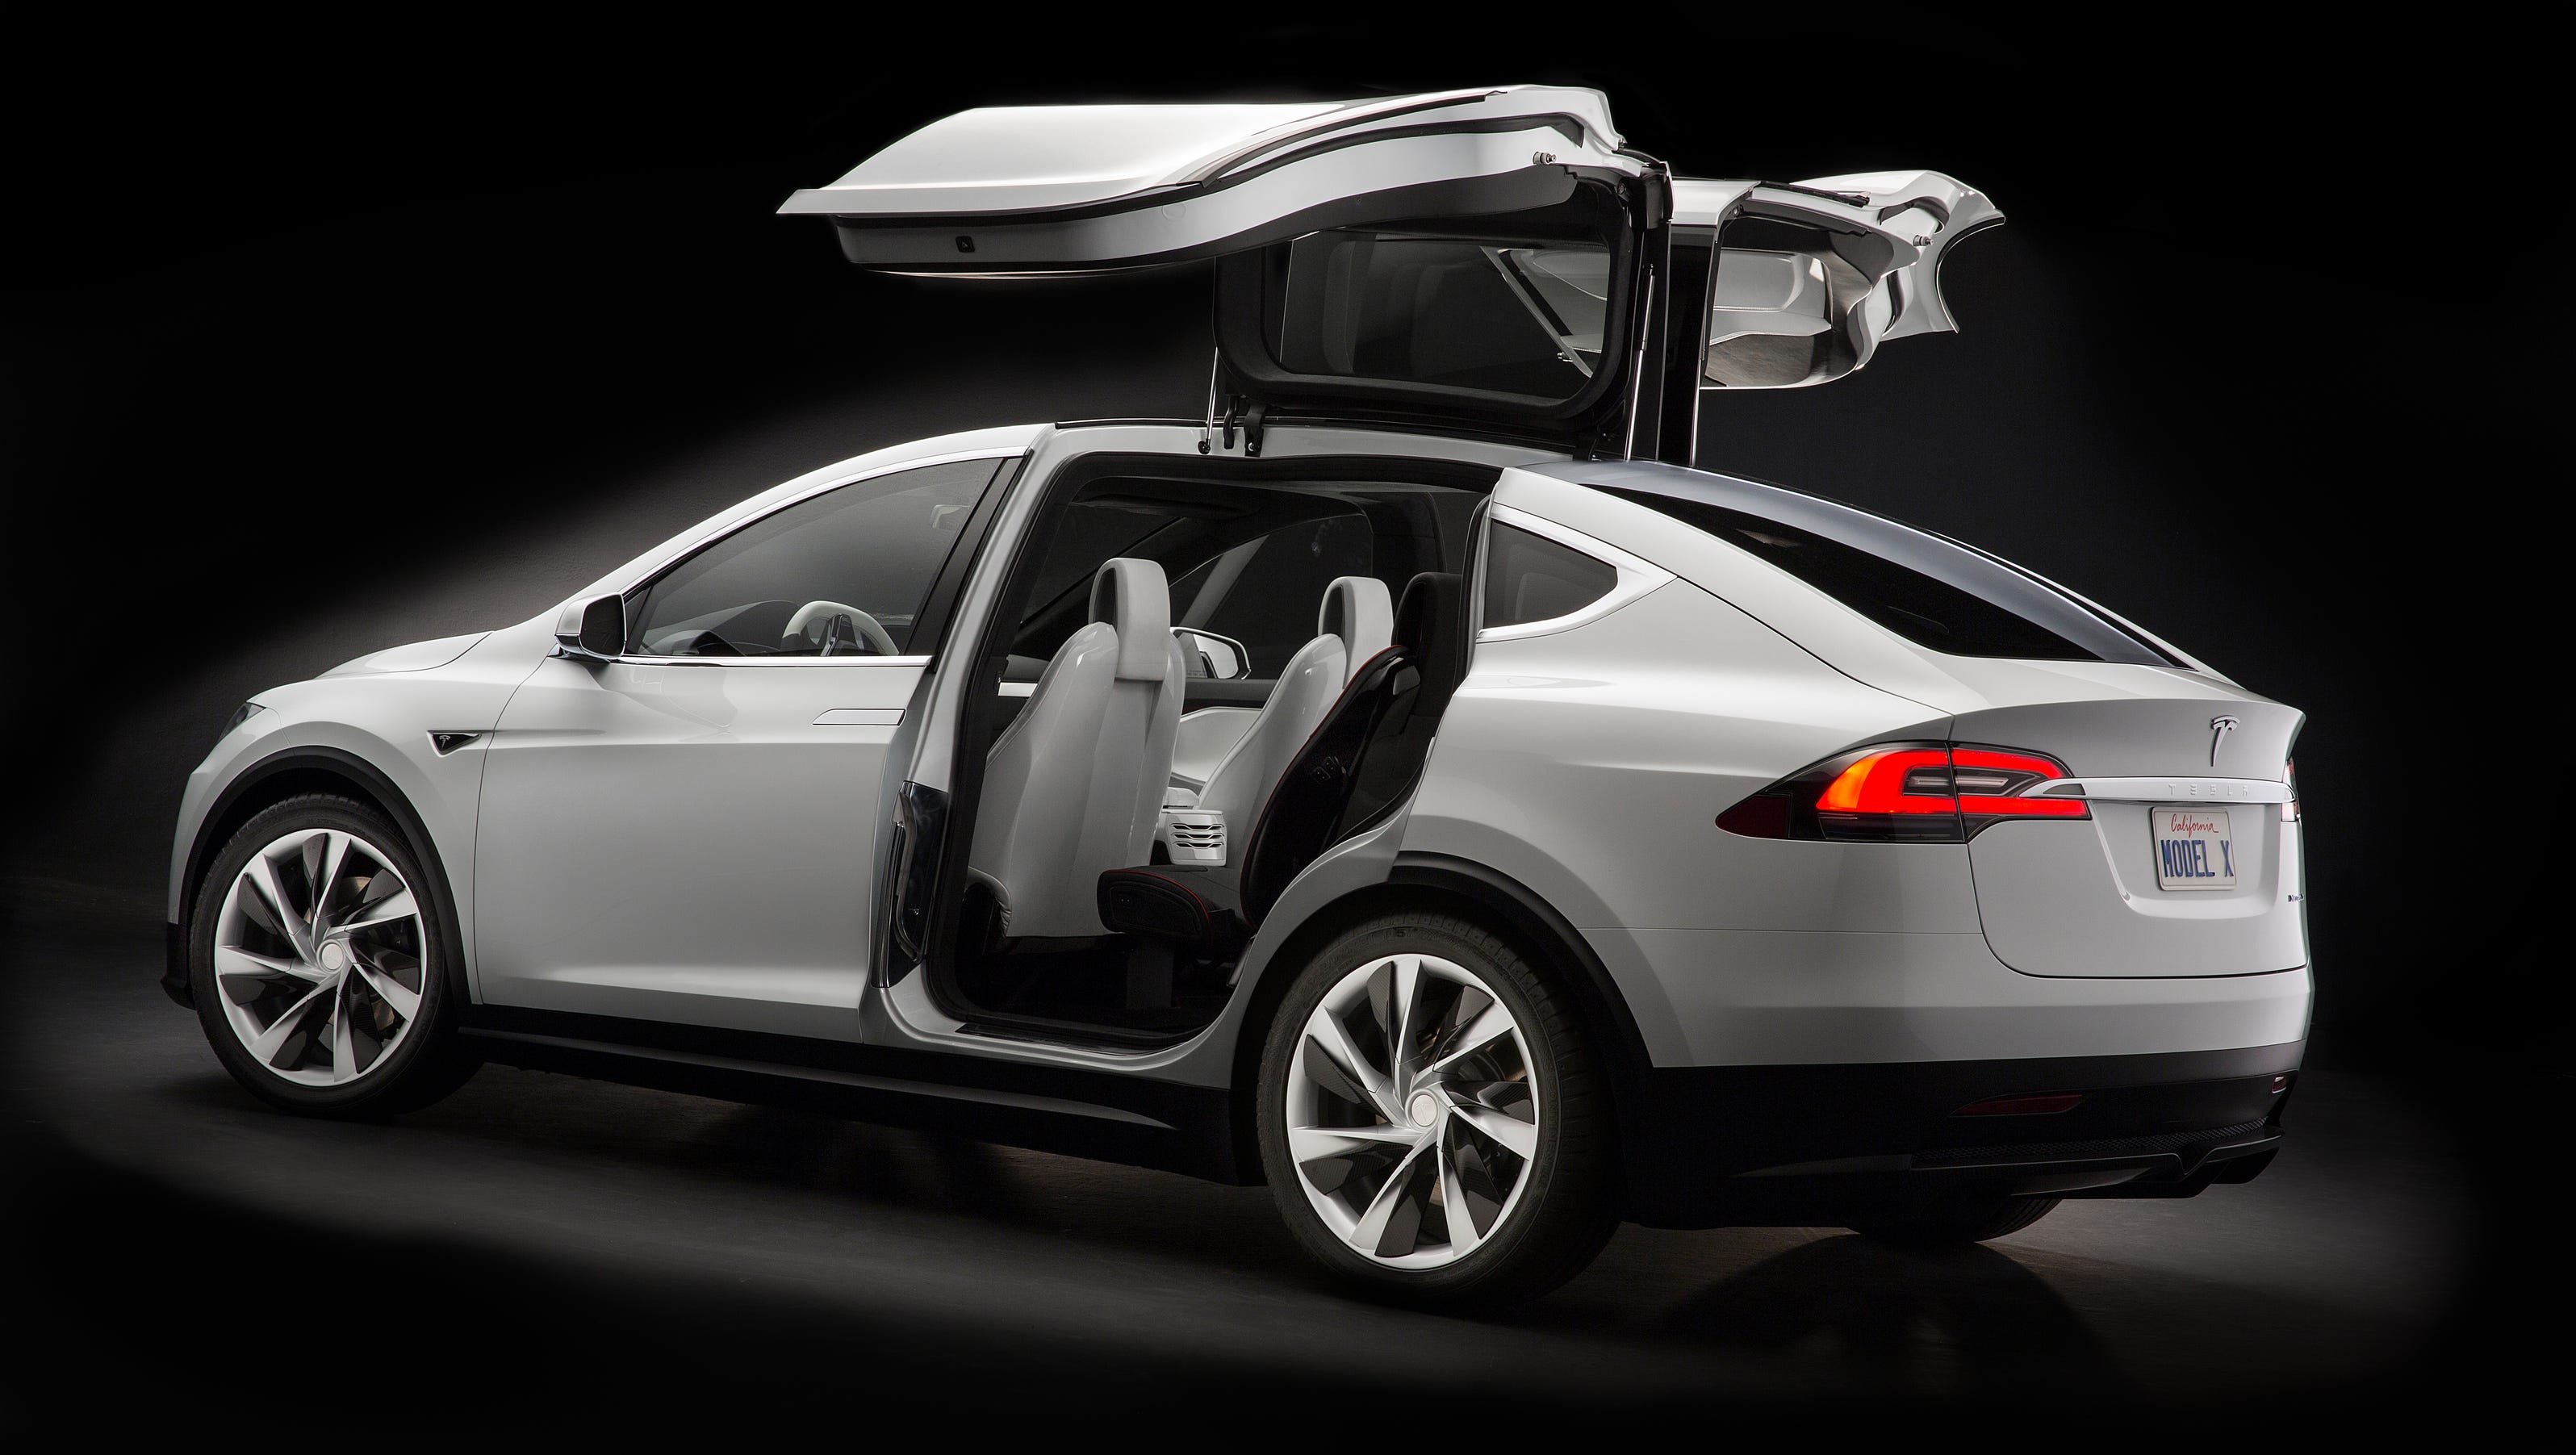 Analyst hints at delay for Tesla's electric SUV